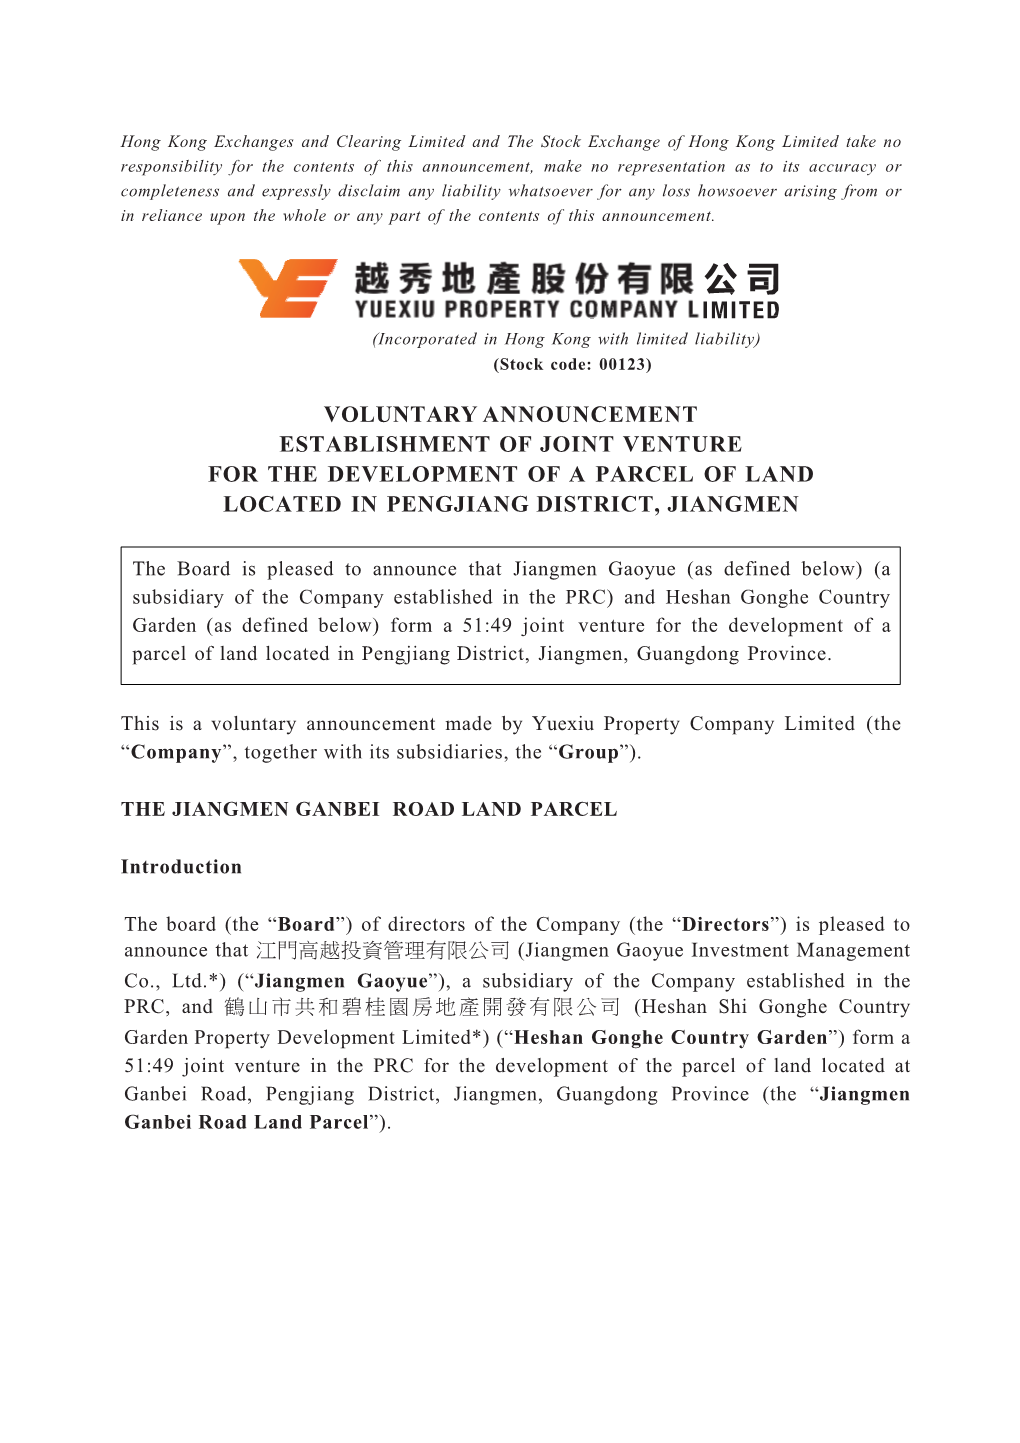 Voluntary Announcement Establishment of Joint Venture for the Development of a Parcel of Land Located in Pengjiang District, Jiangmen